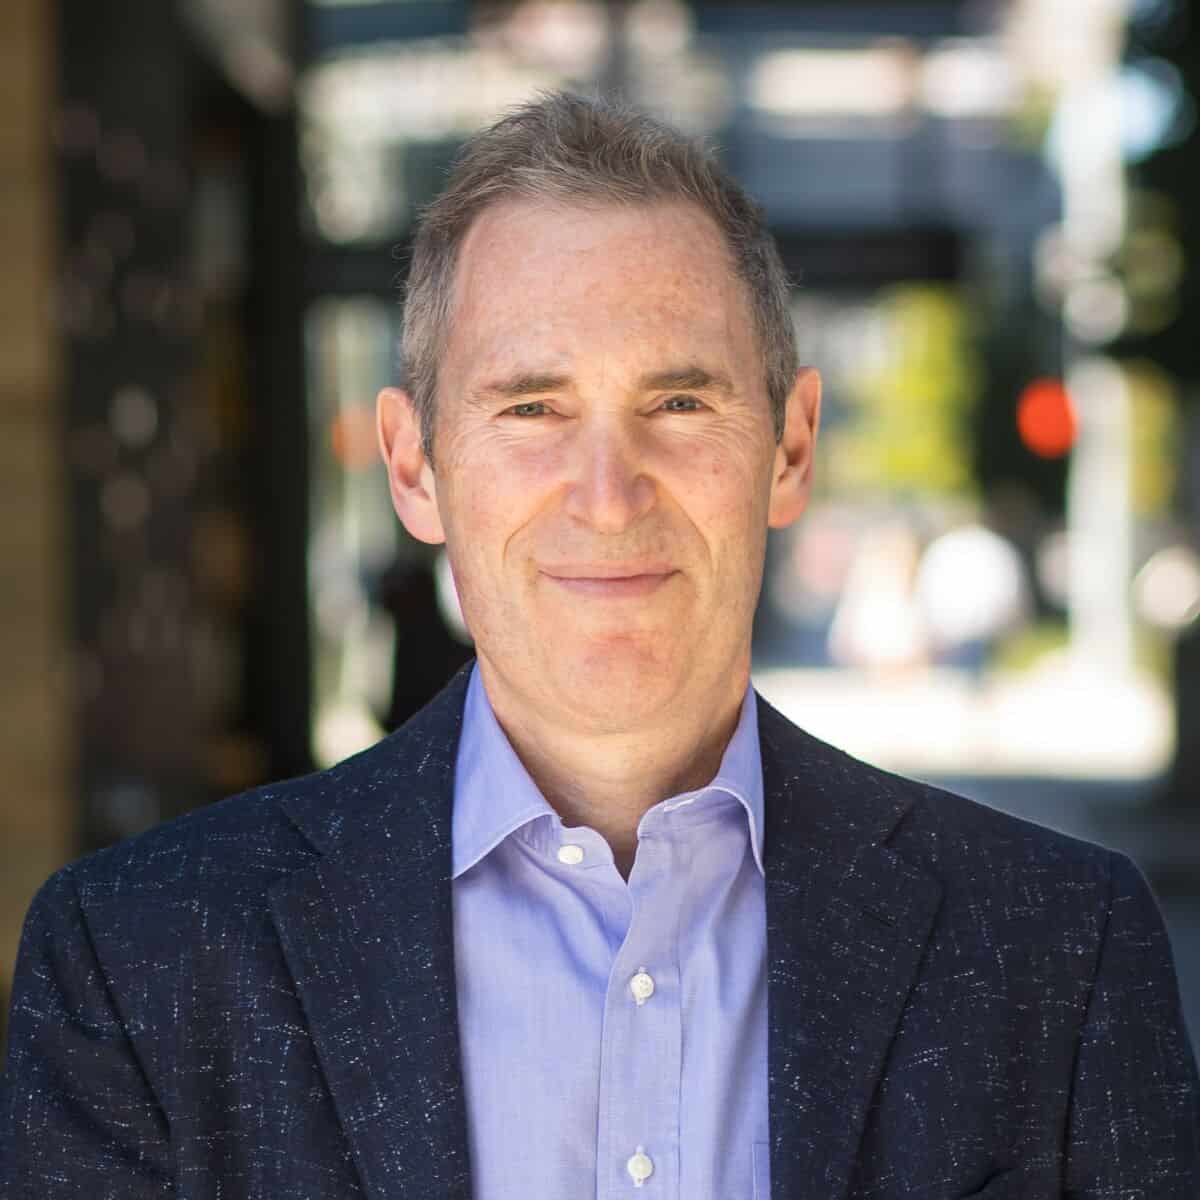 Andy Jassy Net Worth Details, Personal Info